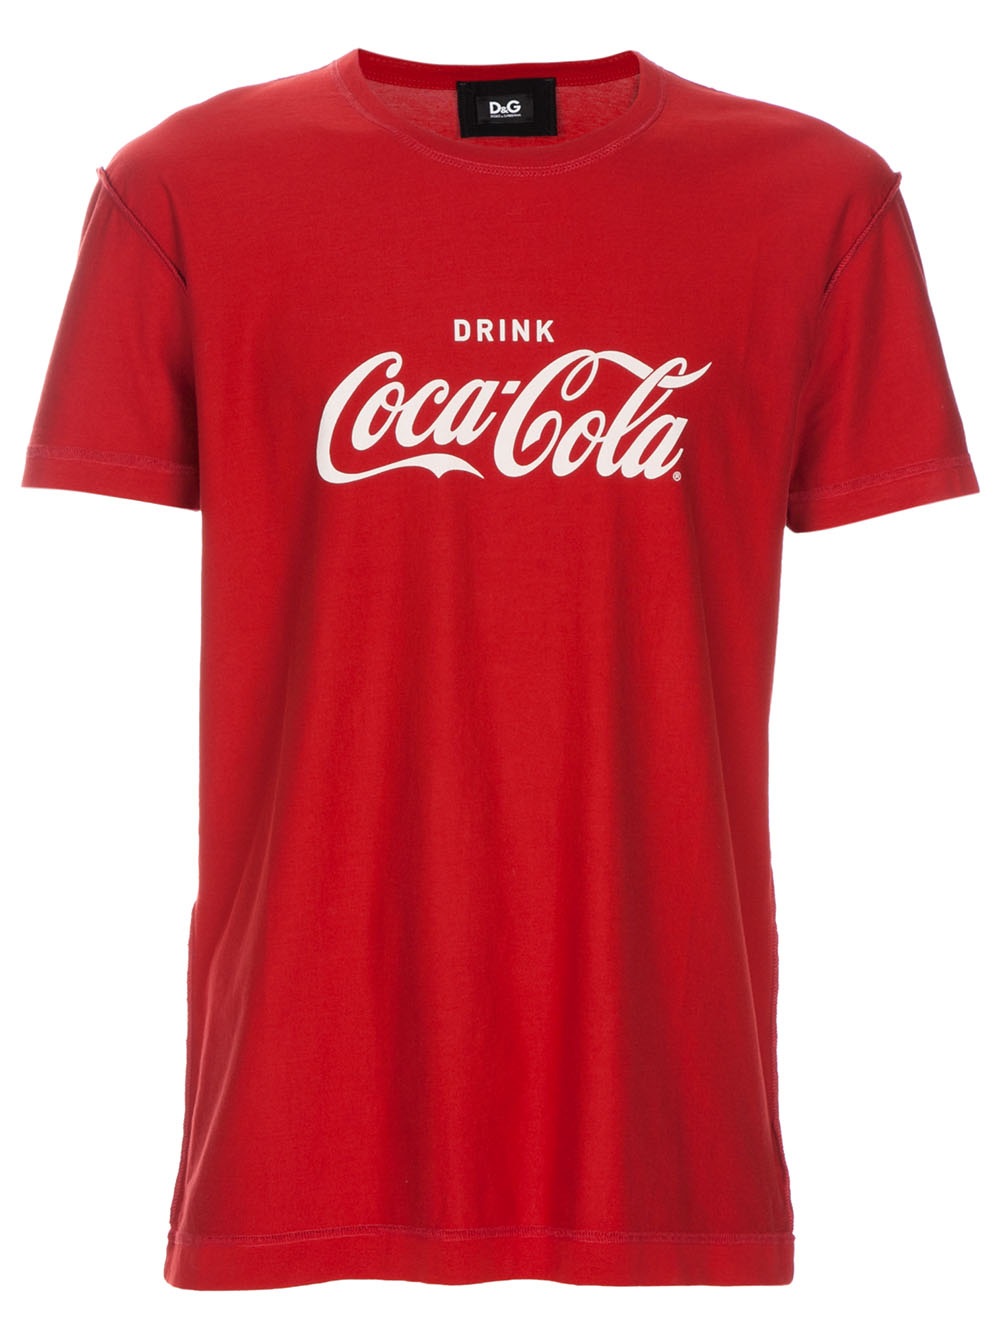 D&g Coca Cola T-shirt in Red for Men | Lyst